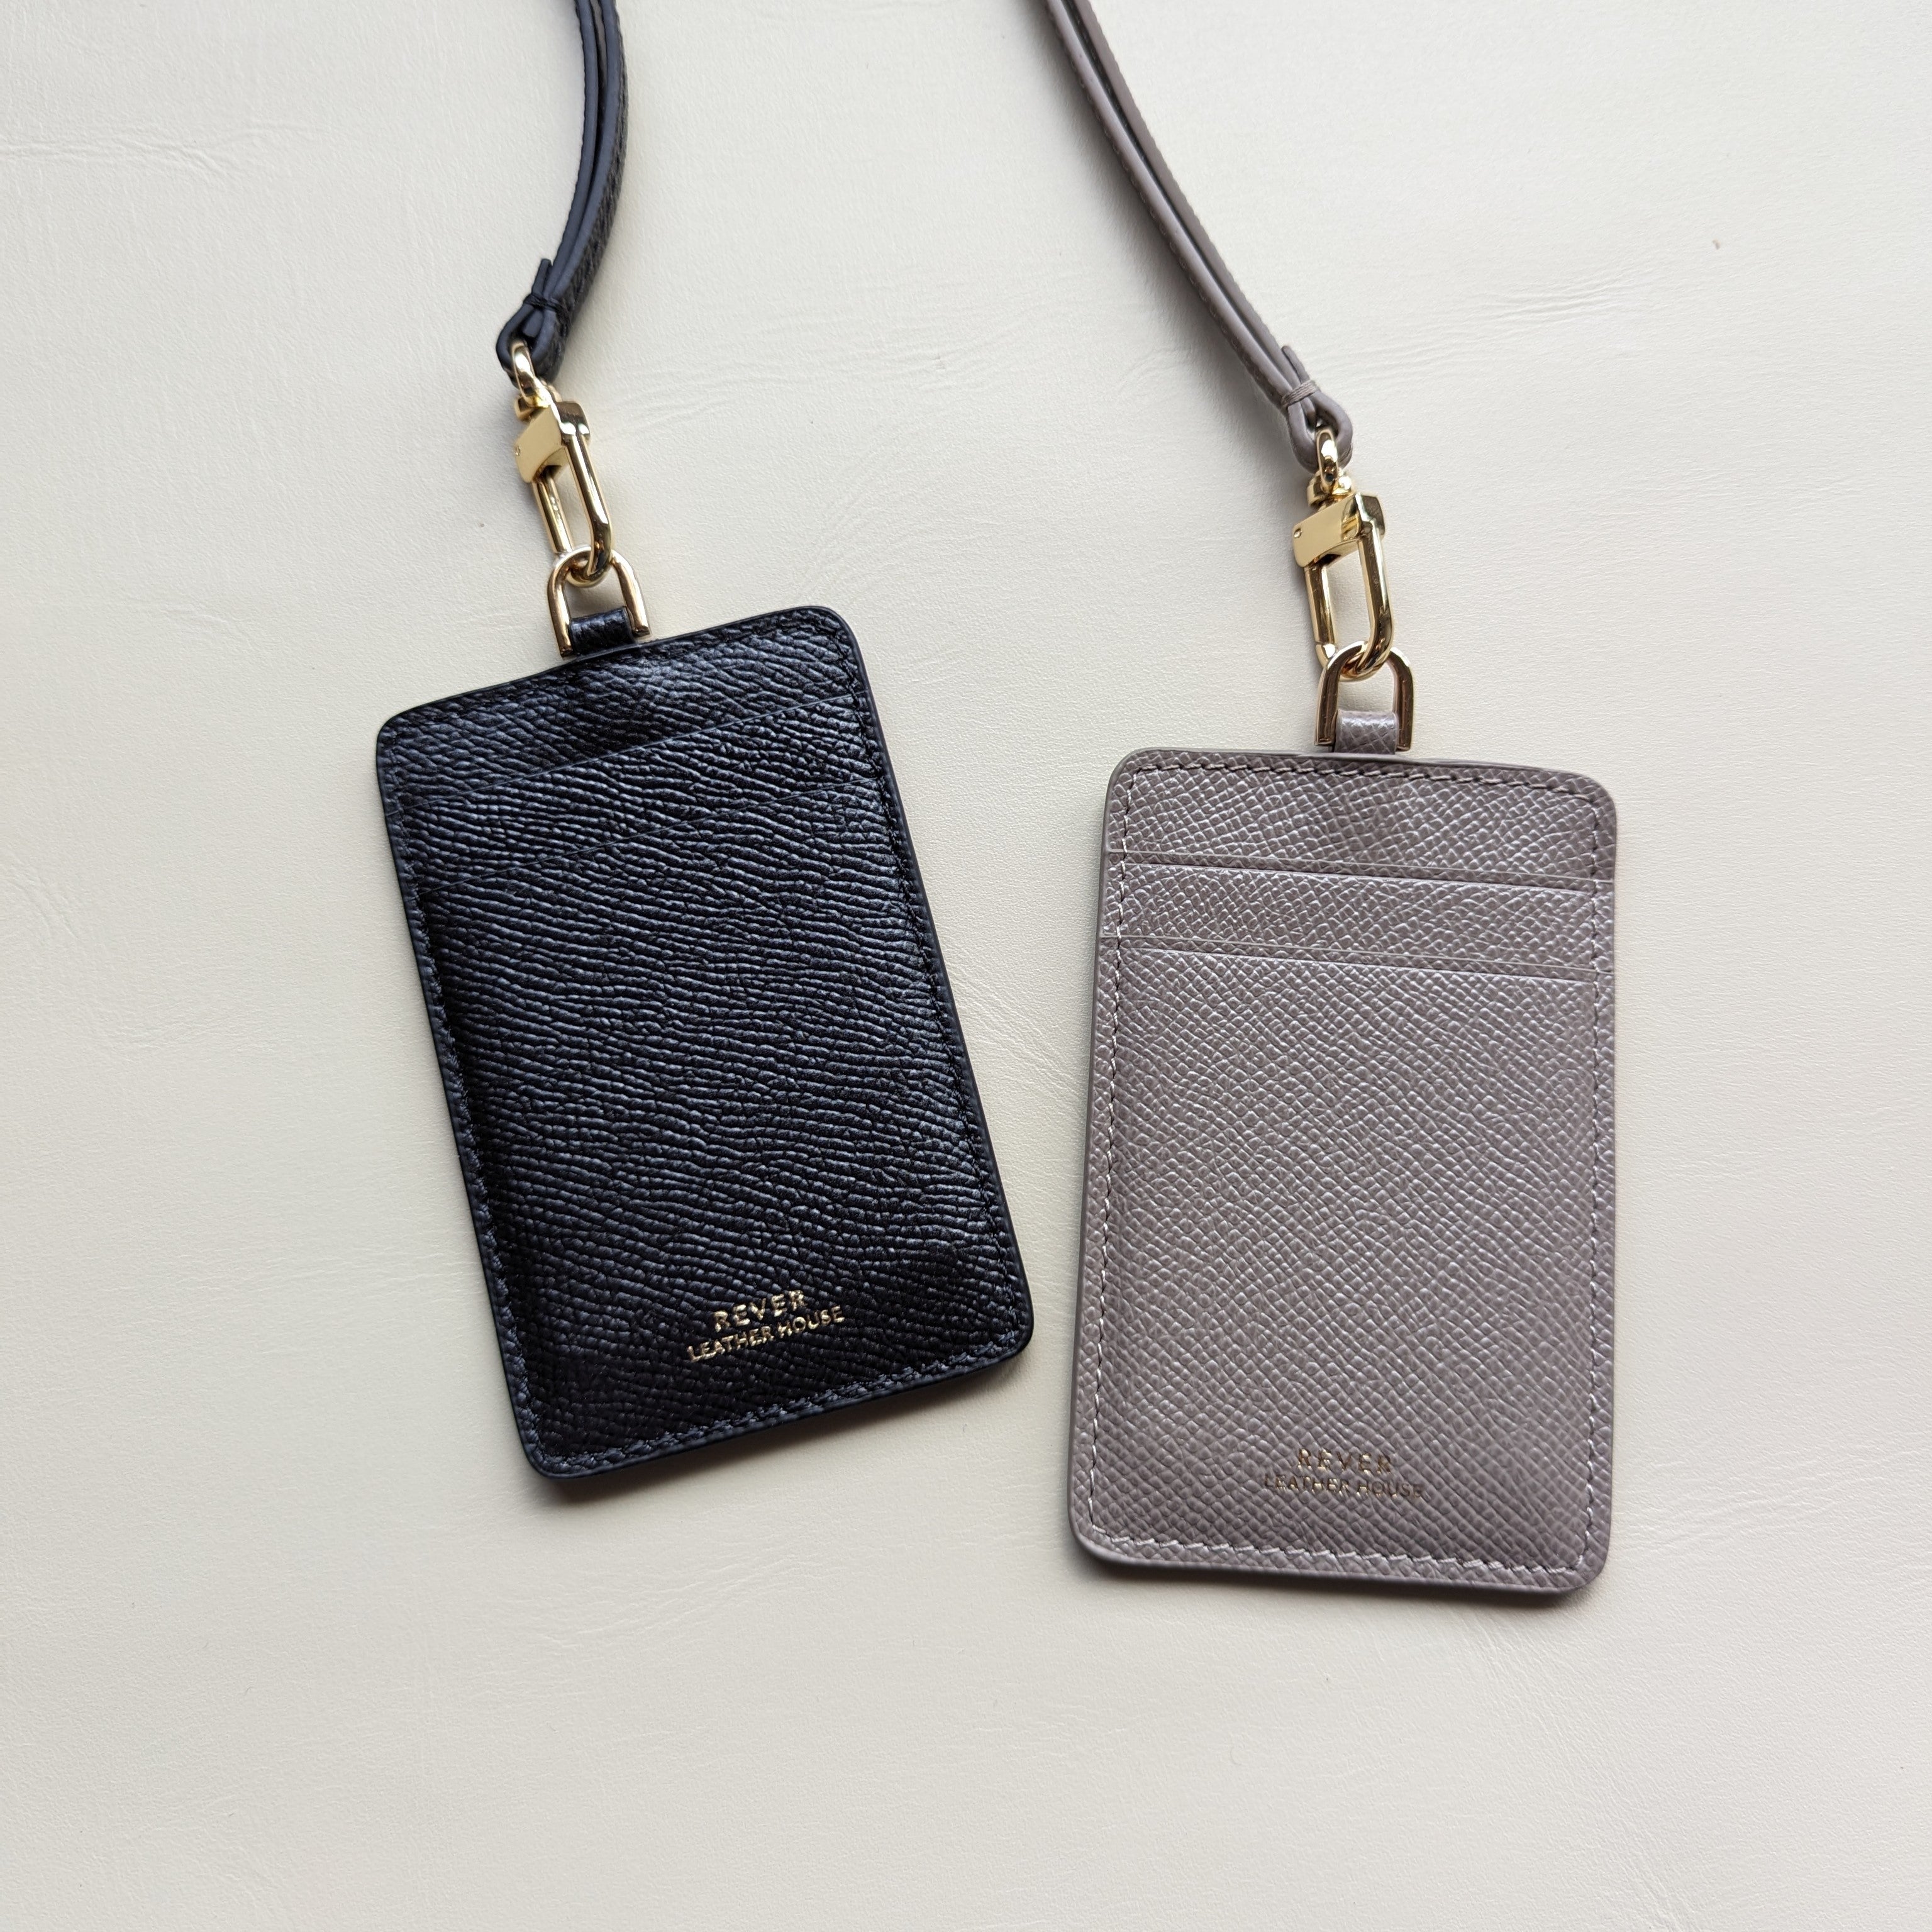 Your Style with Personalized Luxury: The Leon Lanyard Card Holder